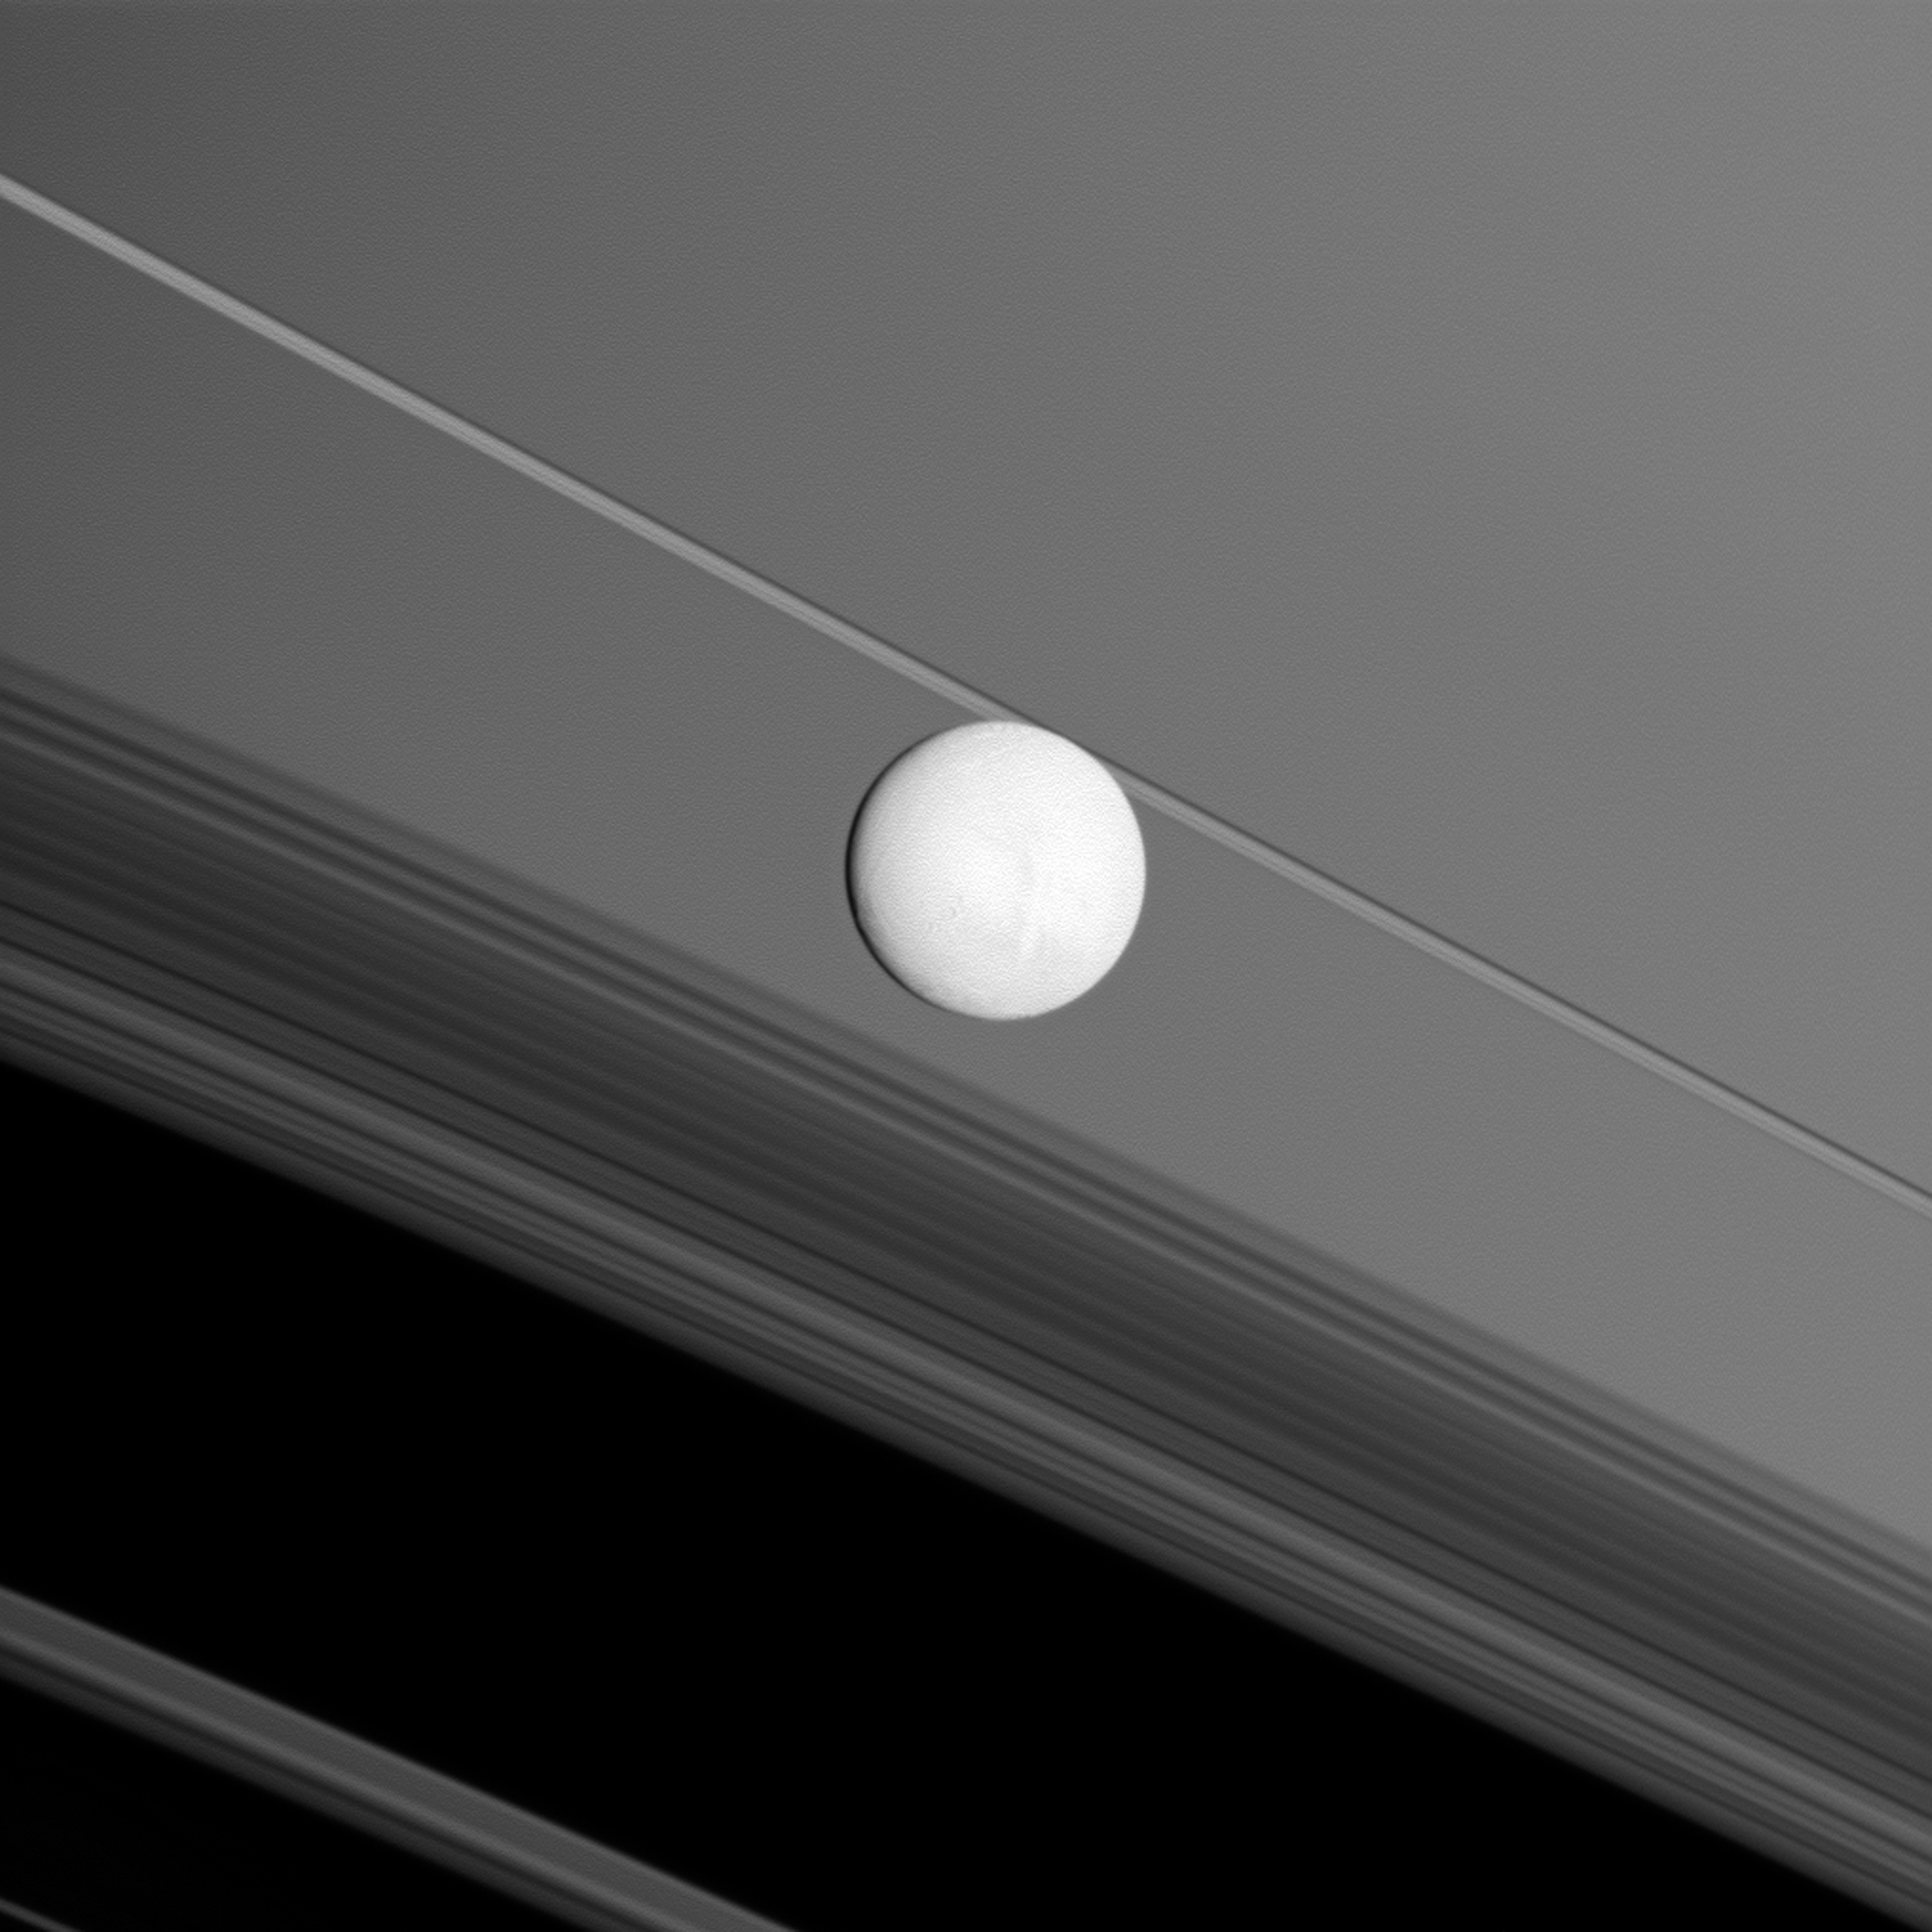 Saturn's moon Enceladus brightly reflects sunlight before a backdrop of the planet's rings.